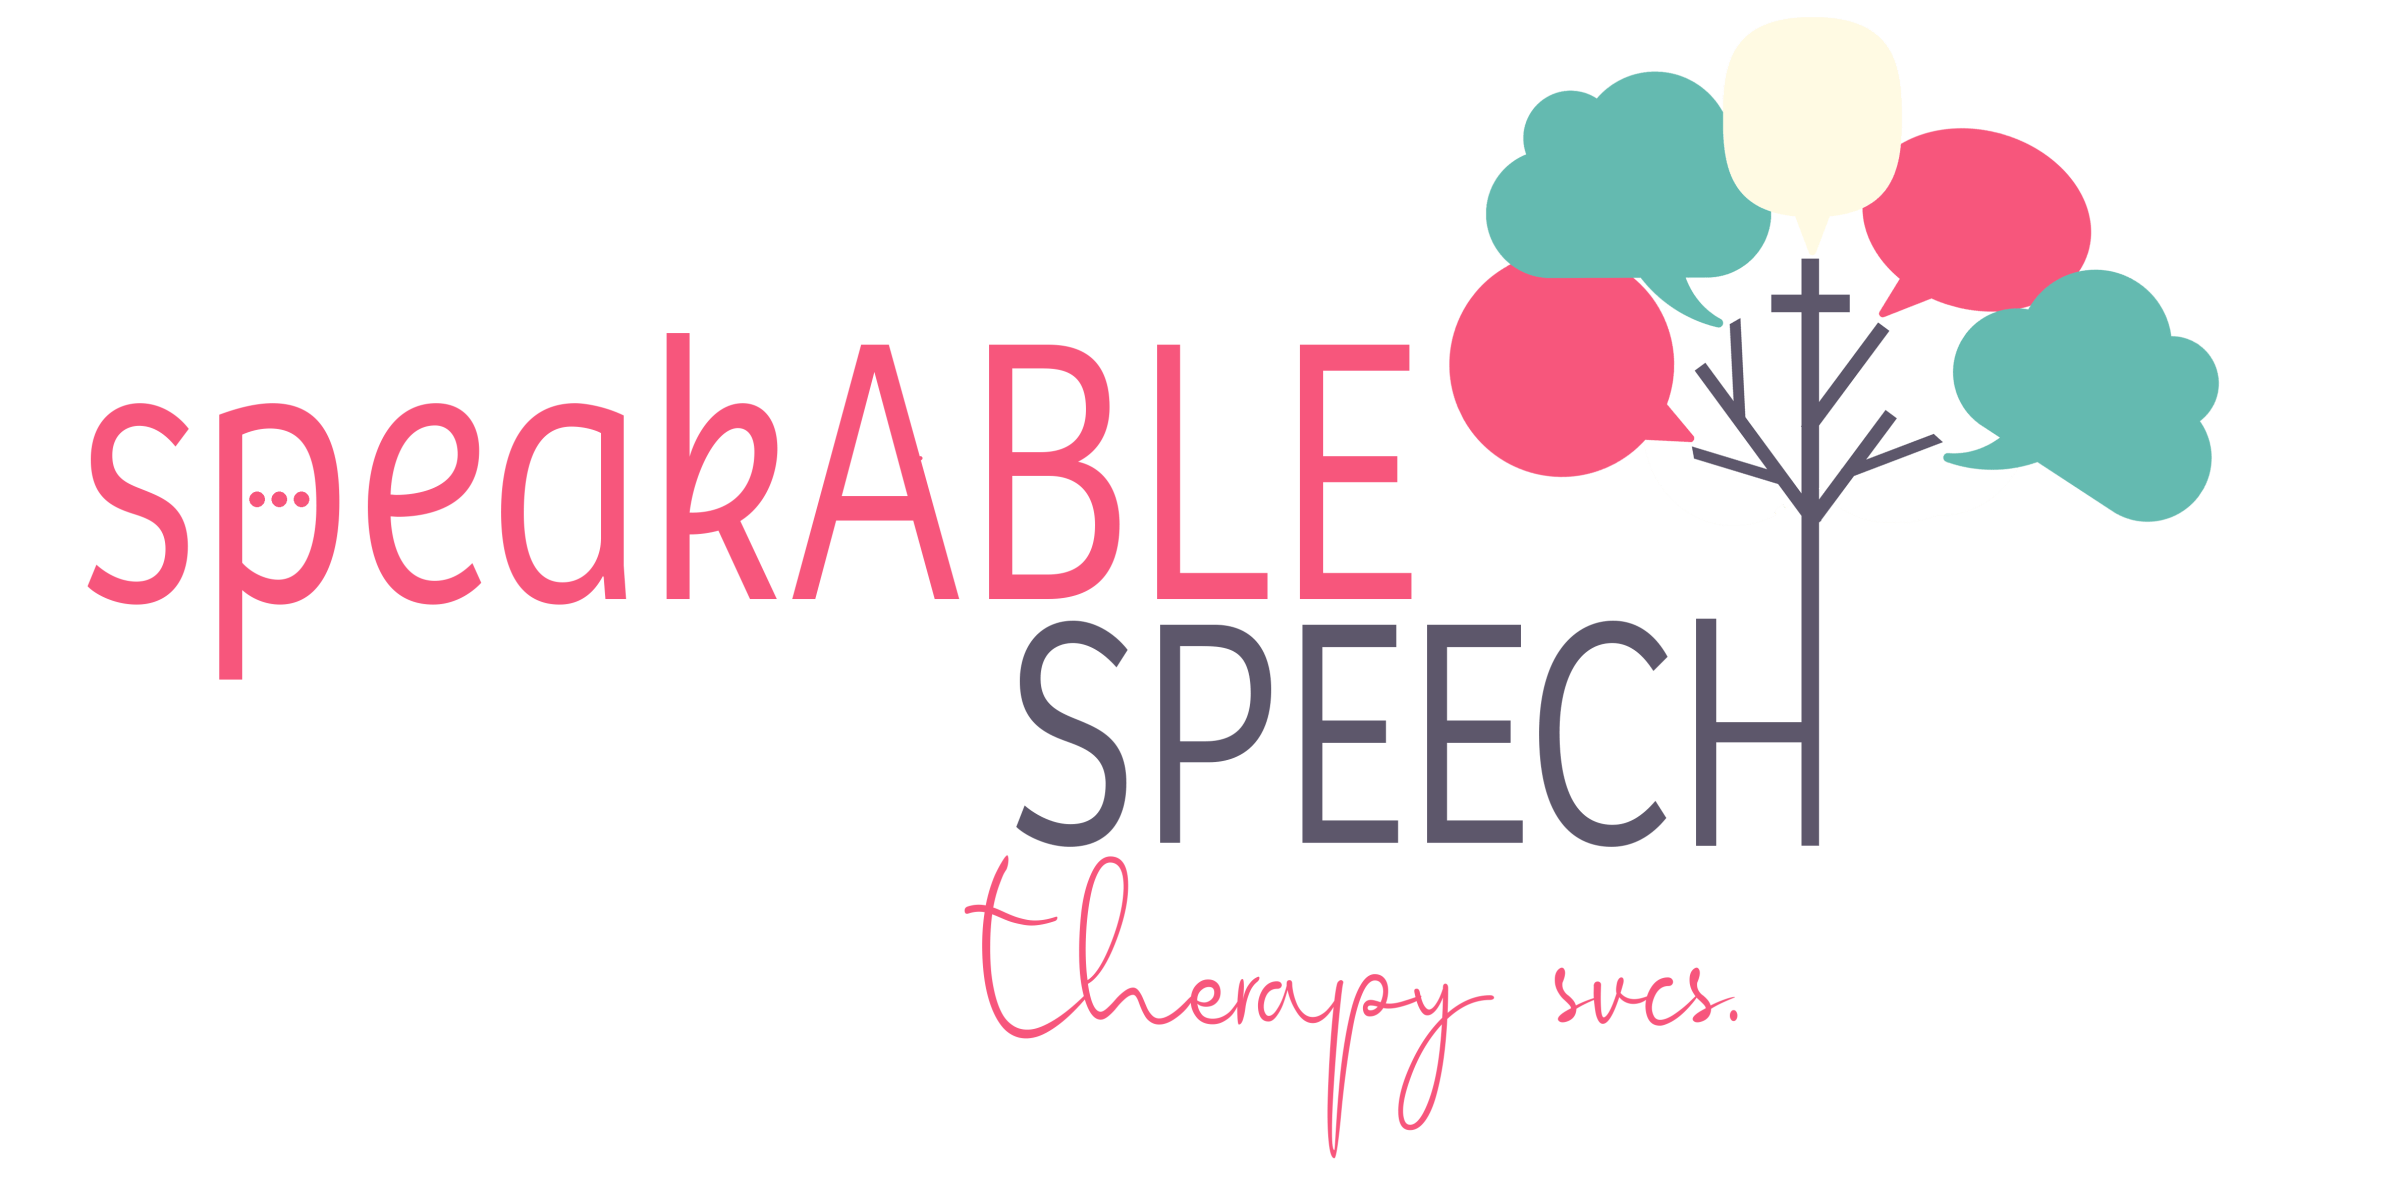 Speakable Speech Therapy logo